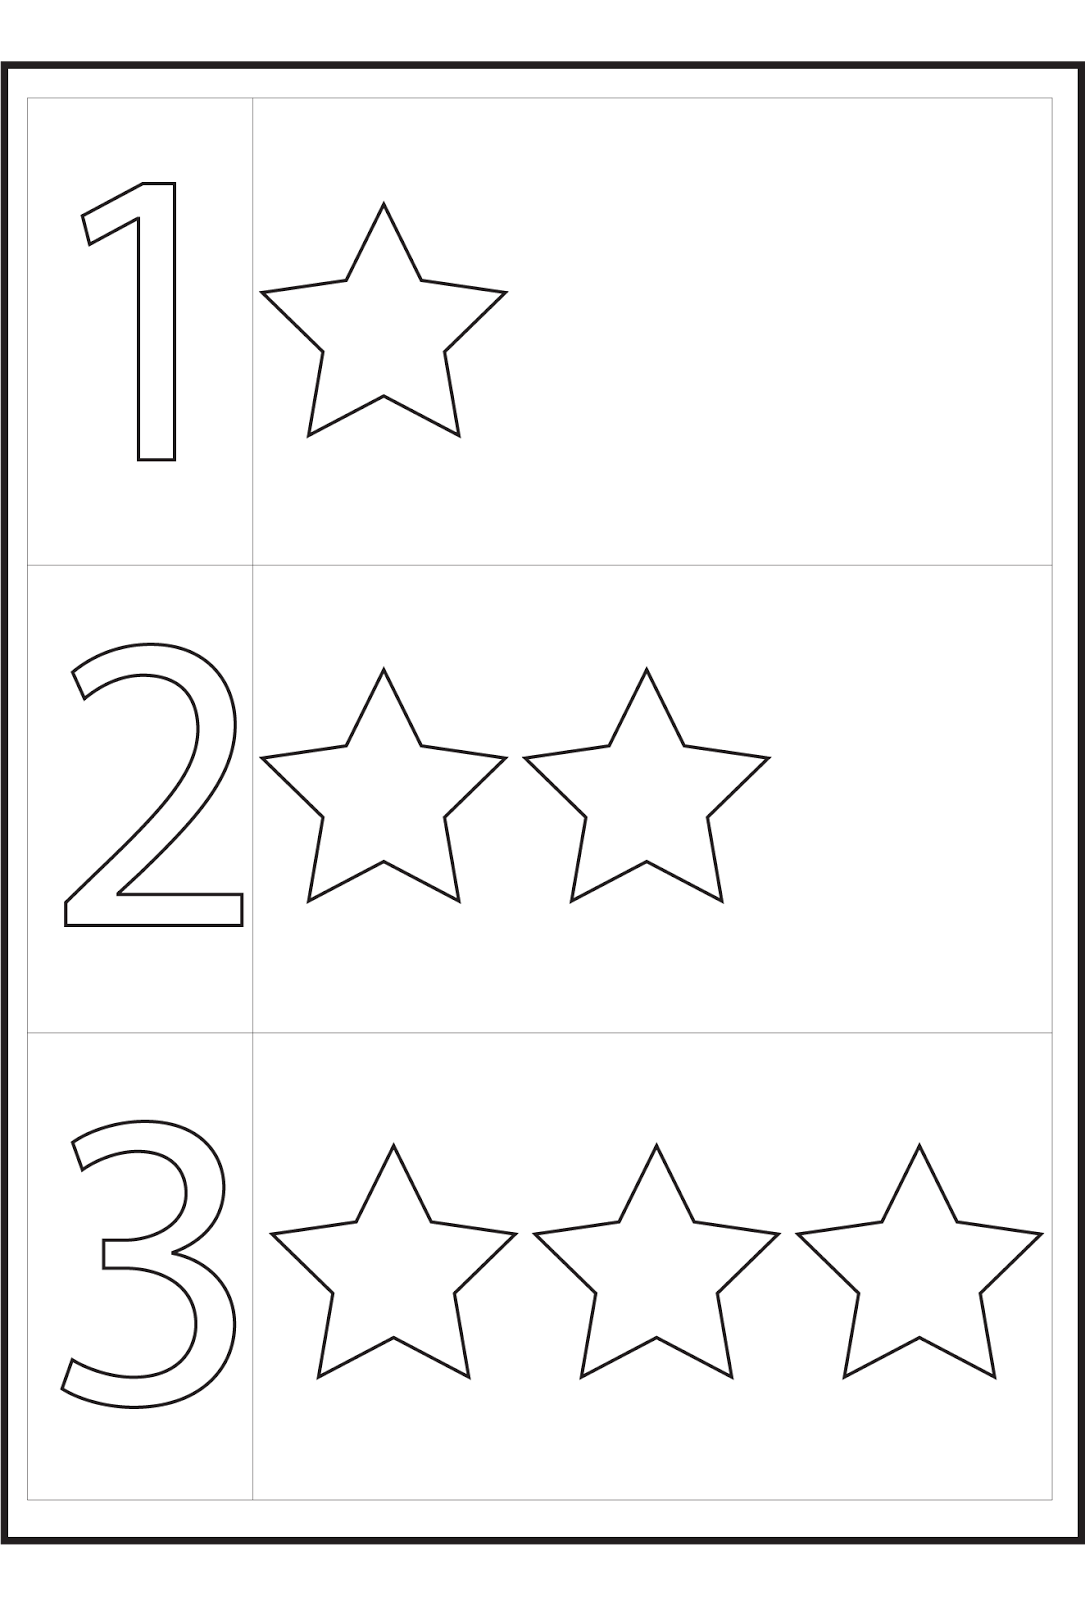 worksheets for 4 year olds stars